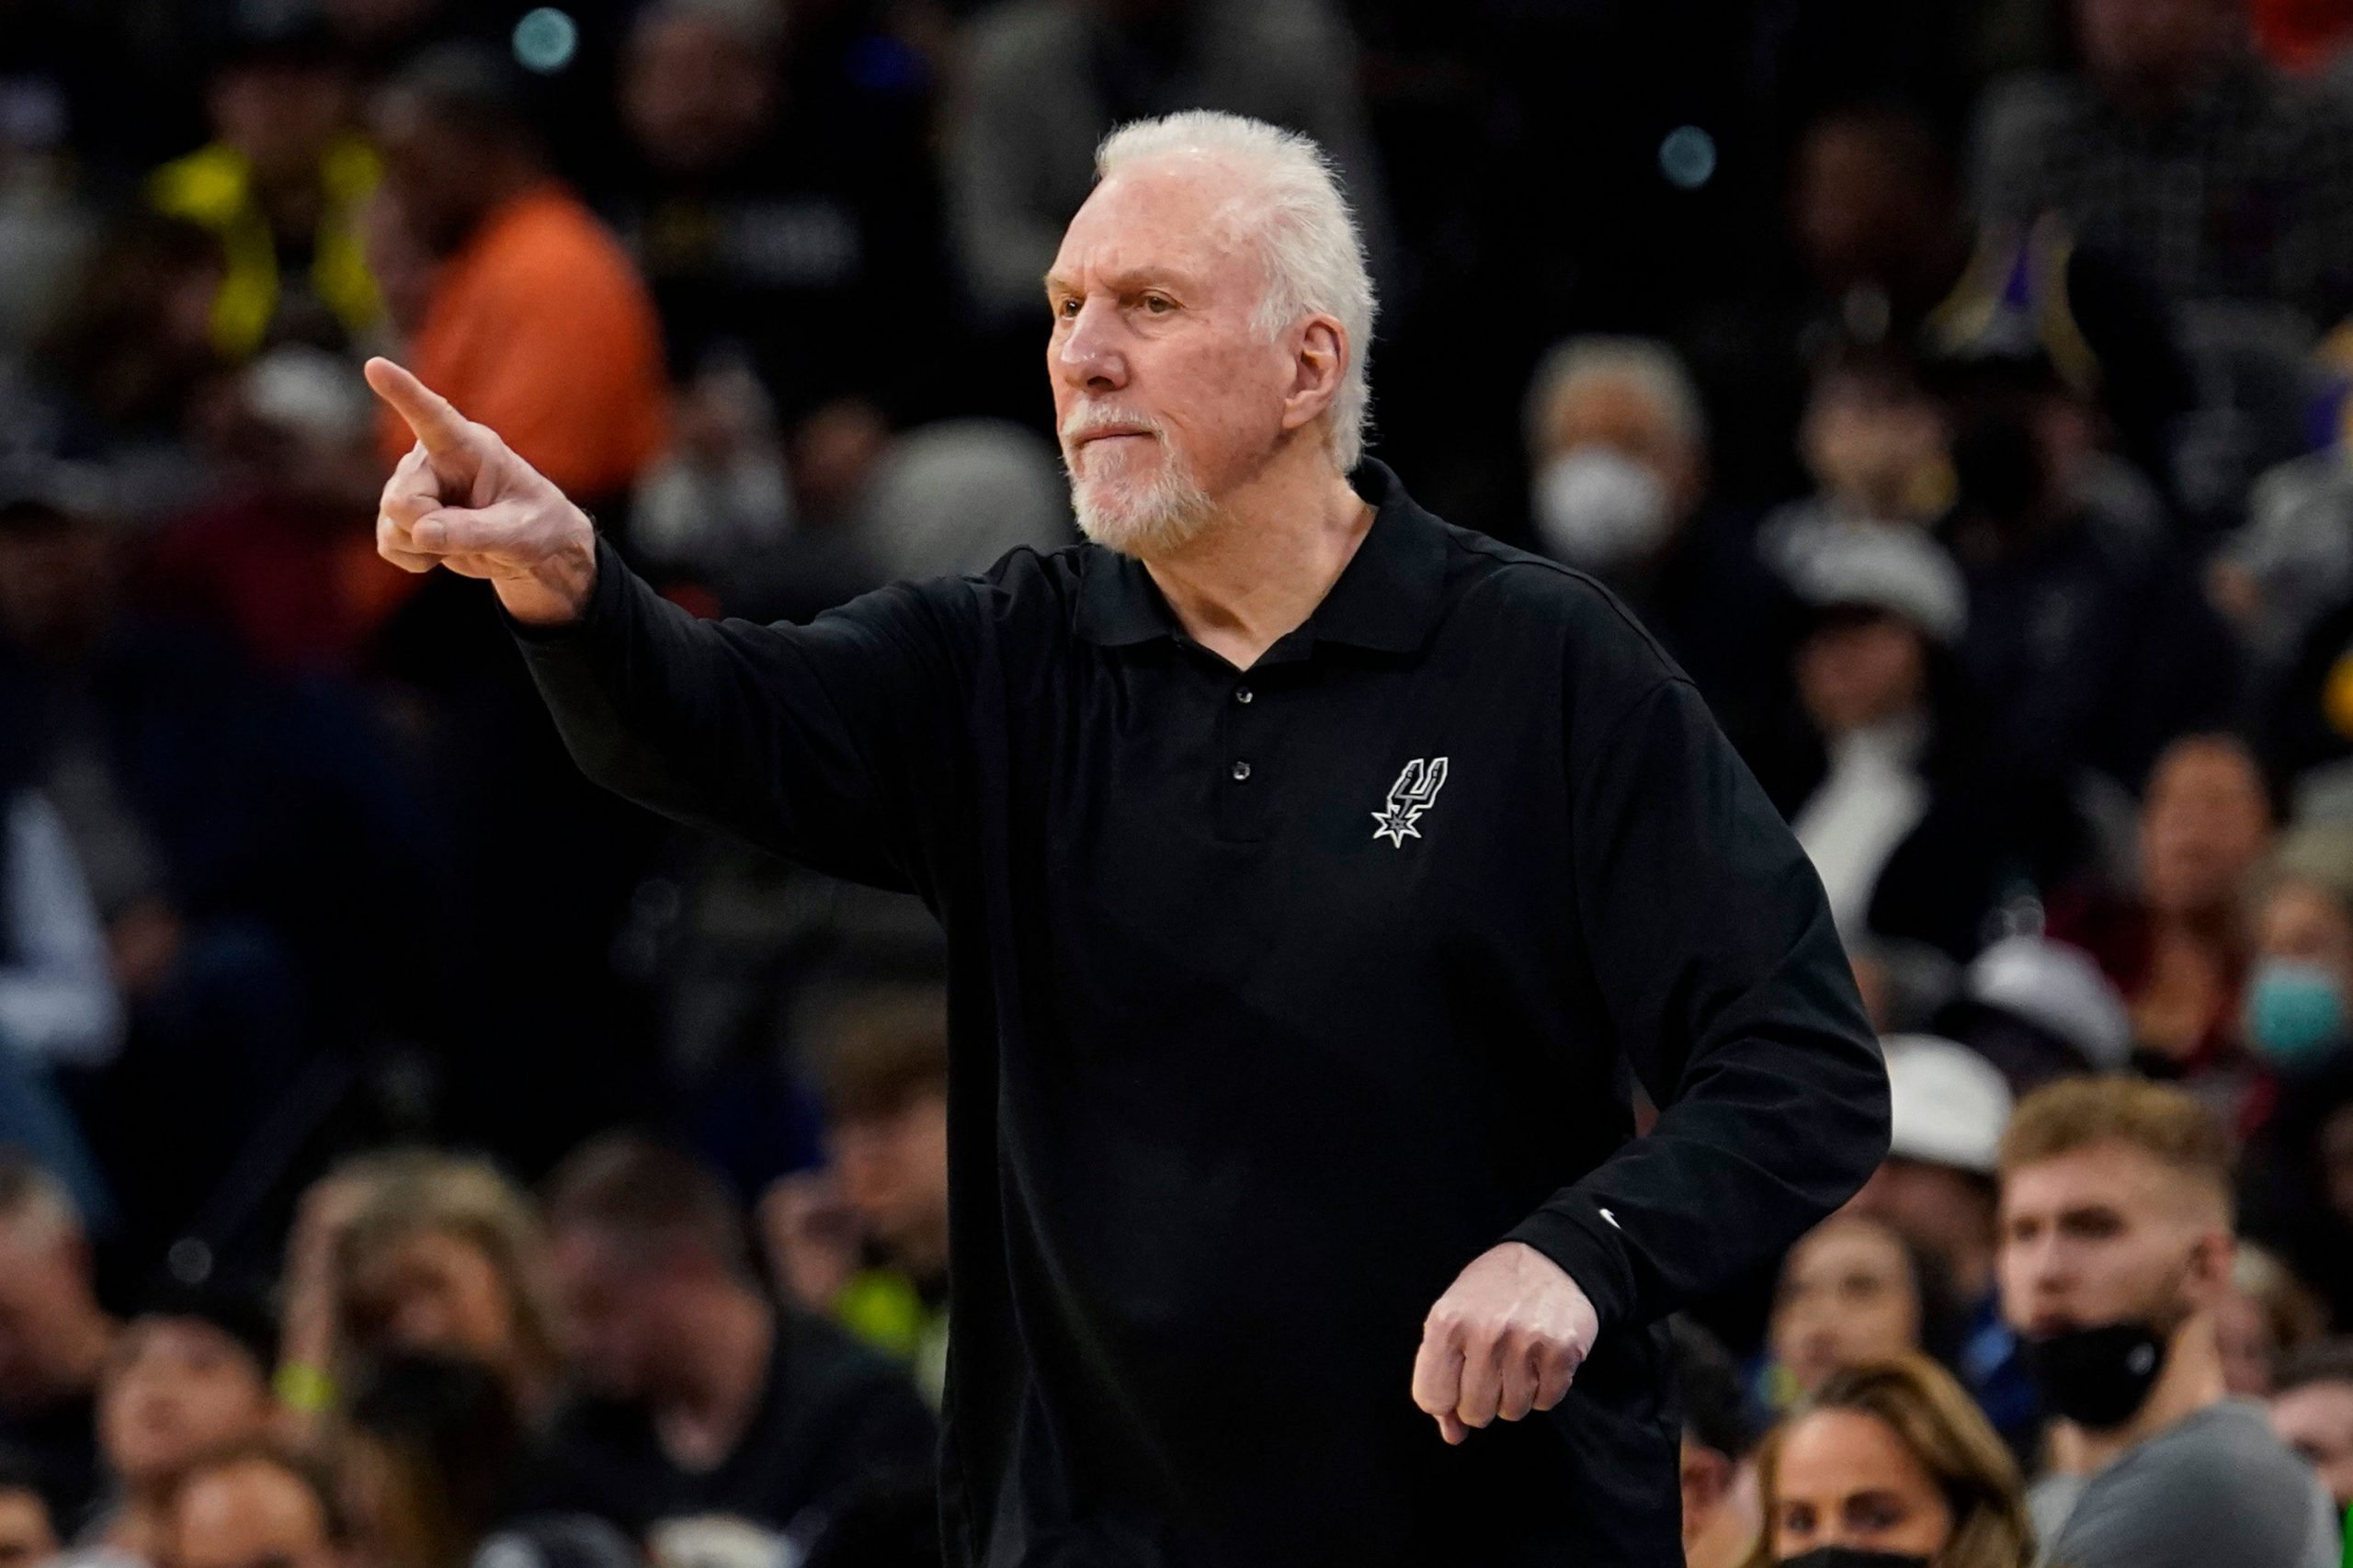 NBA: Spurs’ Gregg Popovich ties Don Nelson for career wins record